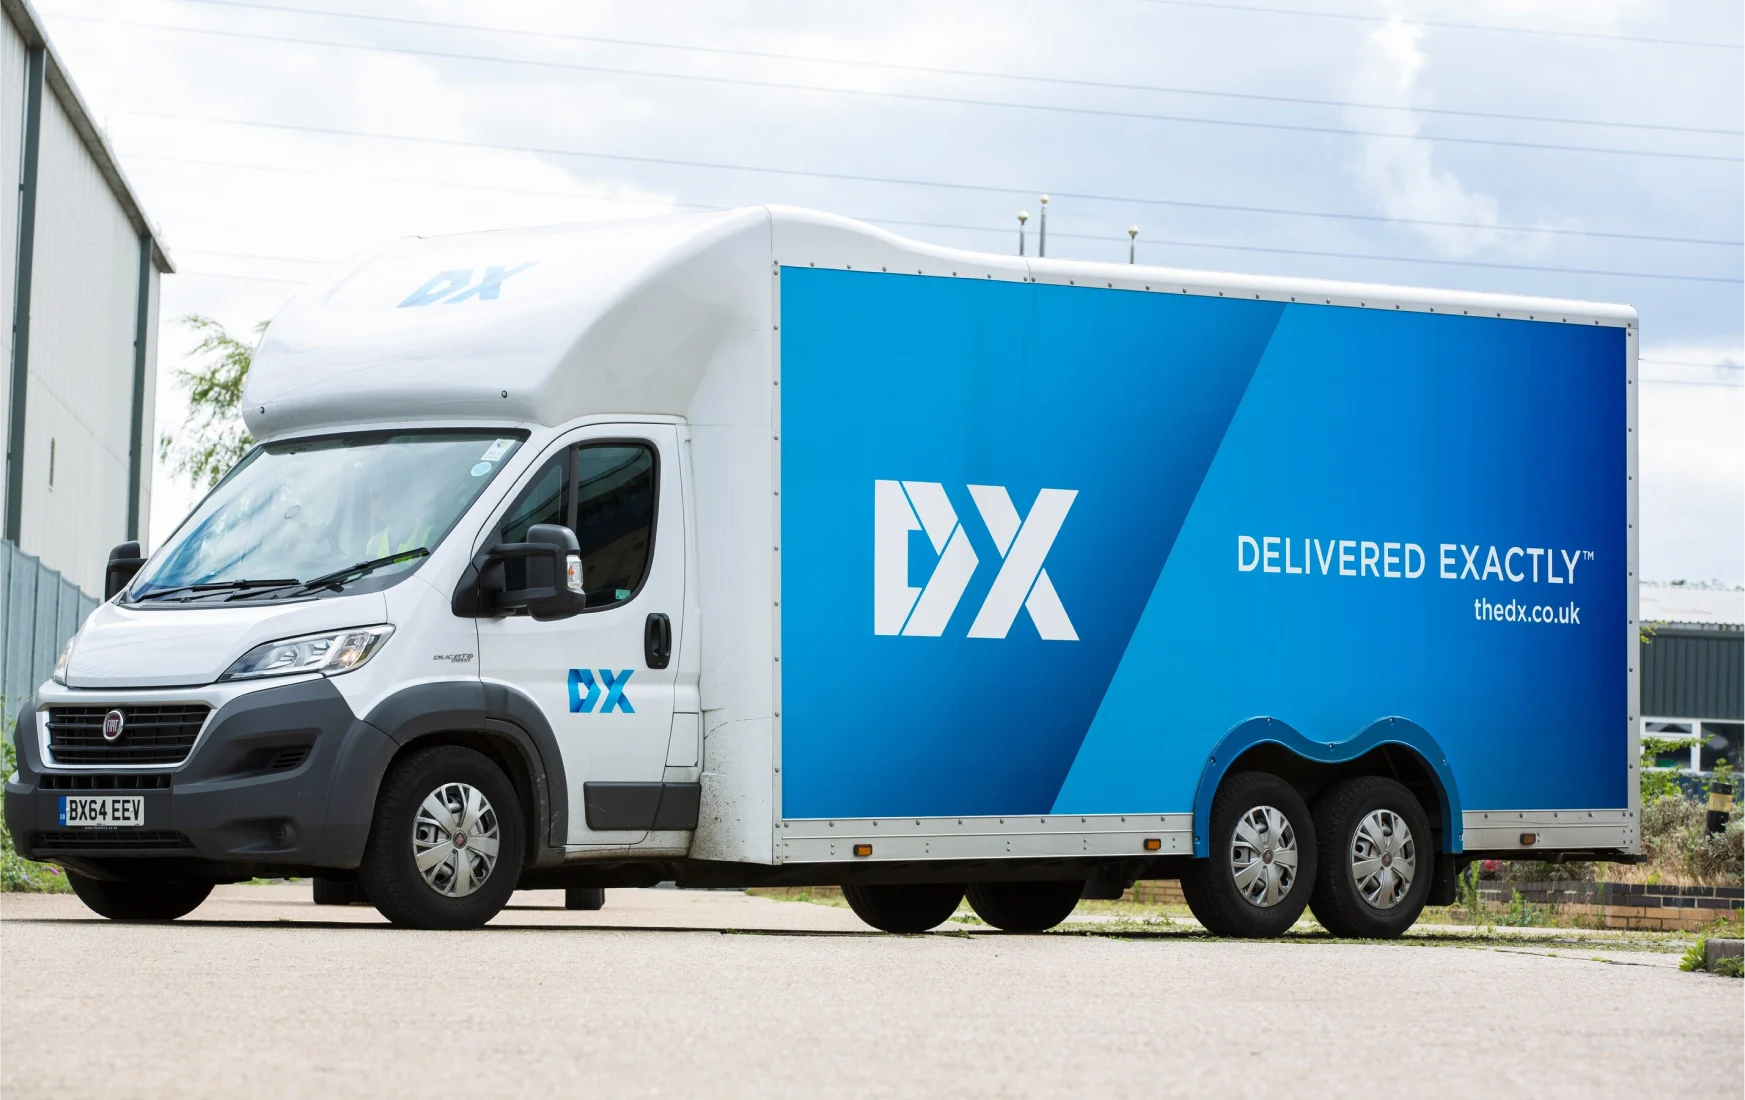 DX Courier Van parked outside